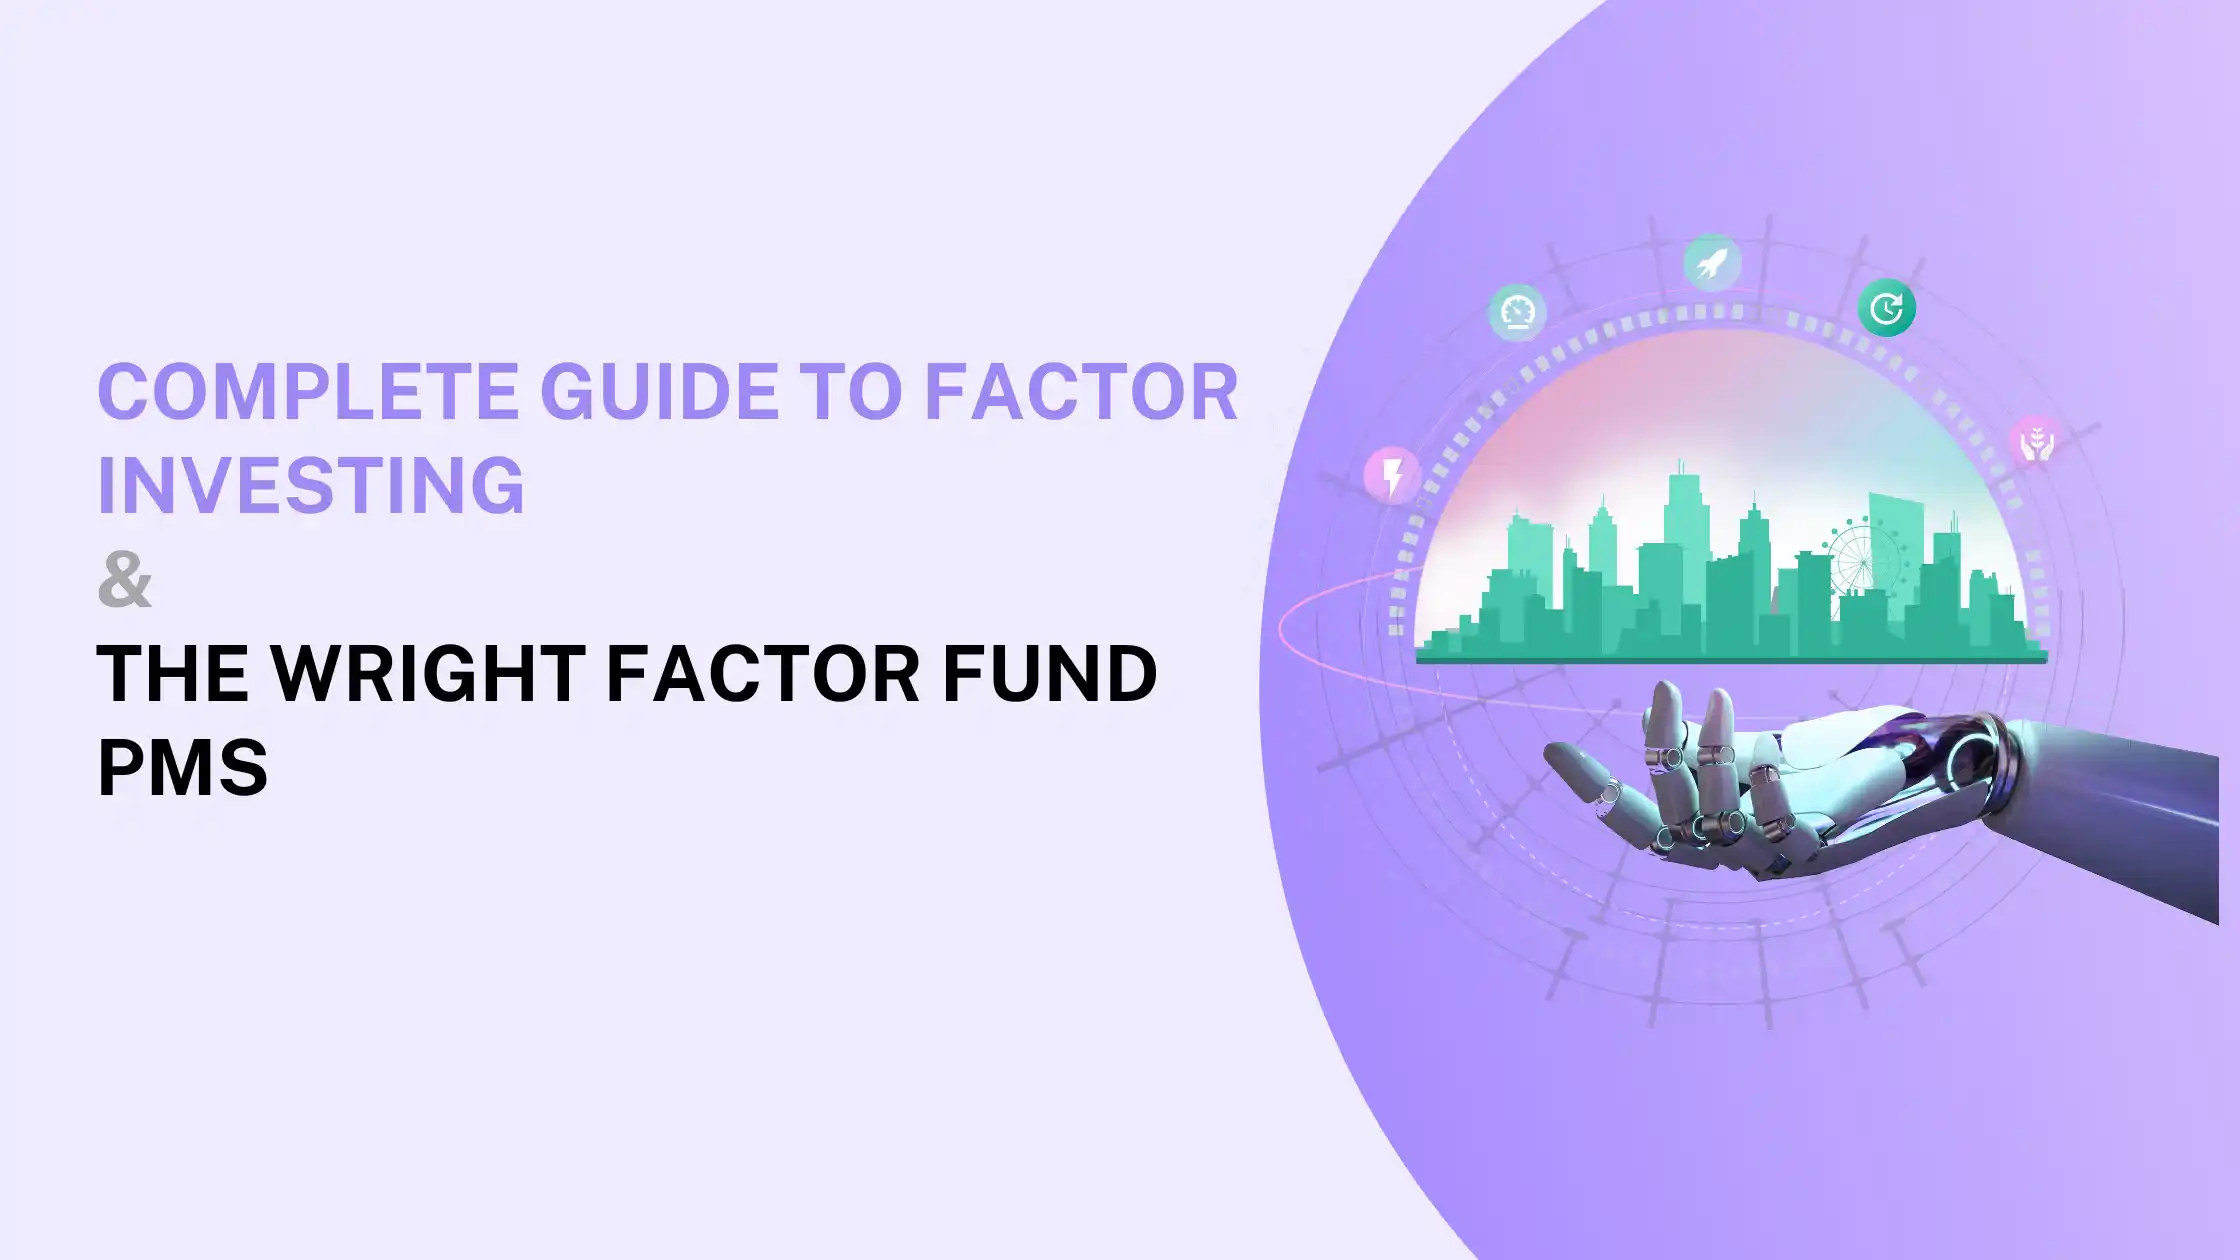 Complete Guide to Factor Investing & the Wright Factor Fund PMS